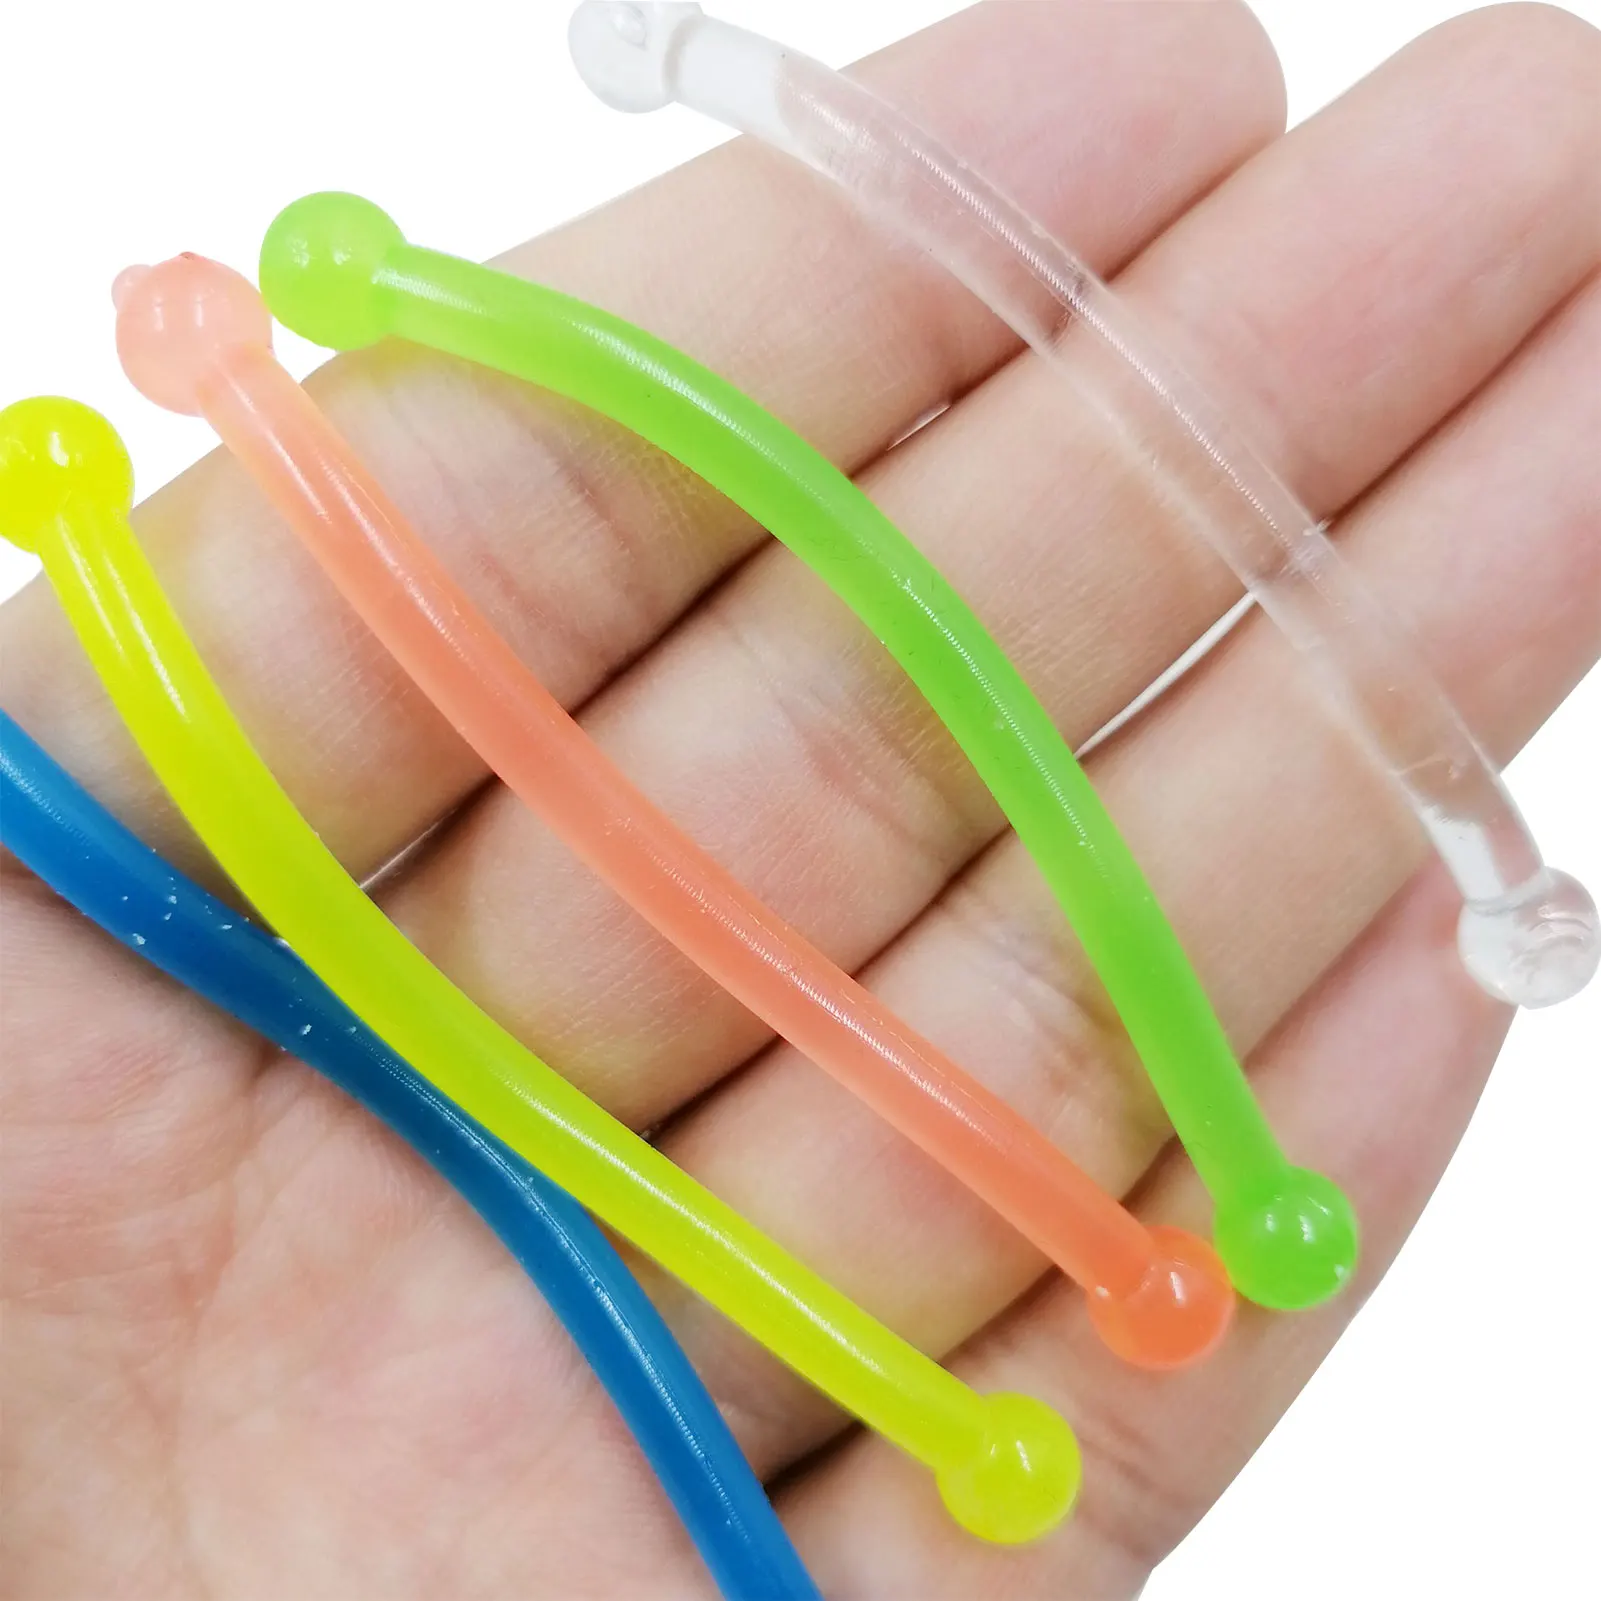 

100pcs Fidgets Anti Stress Twisting Soft Toys Adult Decompression Toy For Children Anxiety Nerve Relief Sensory Squishy Gifts